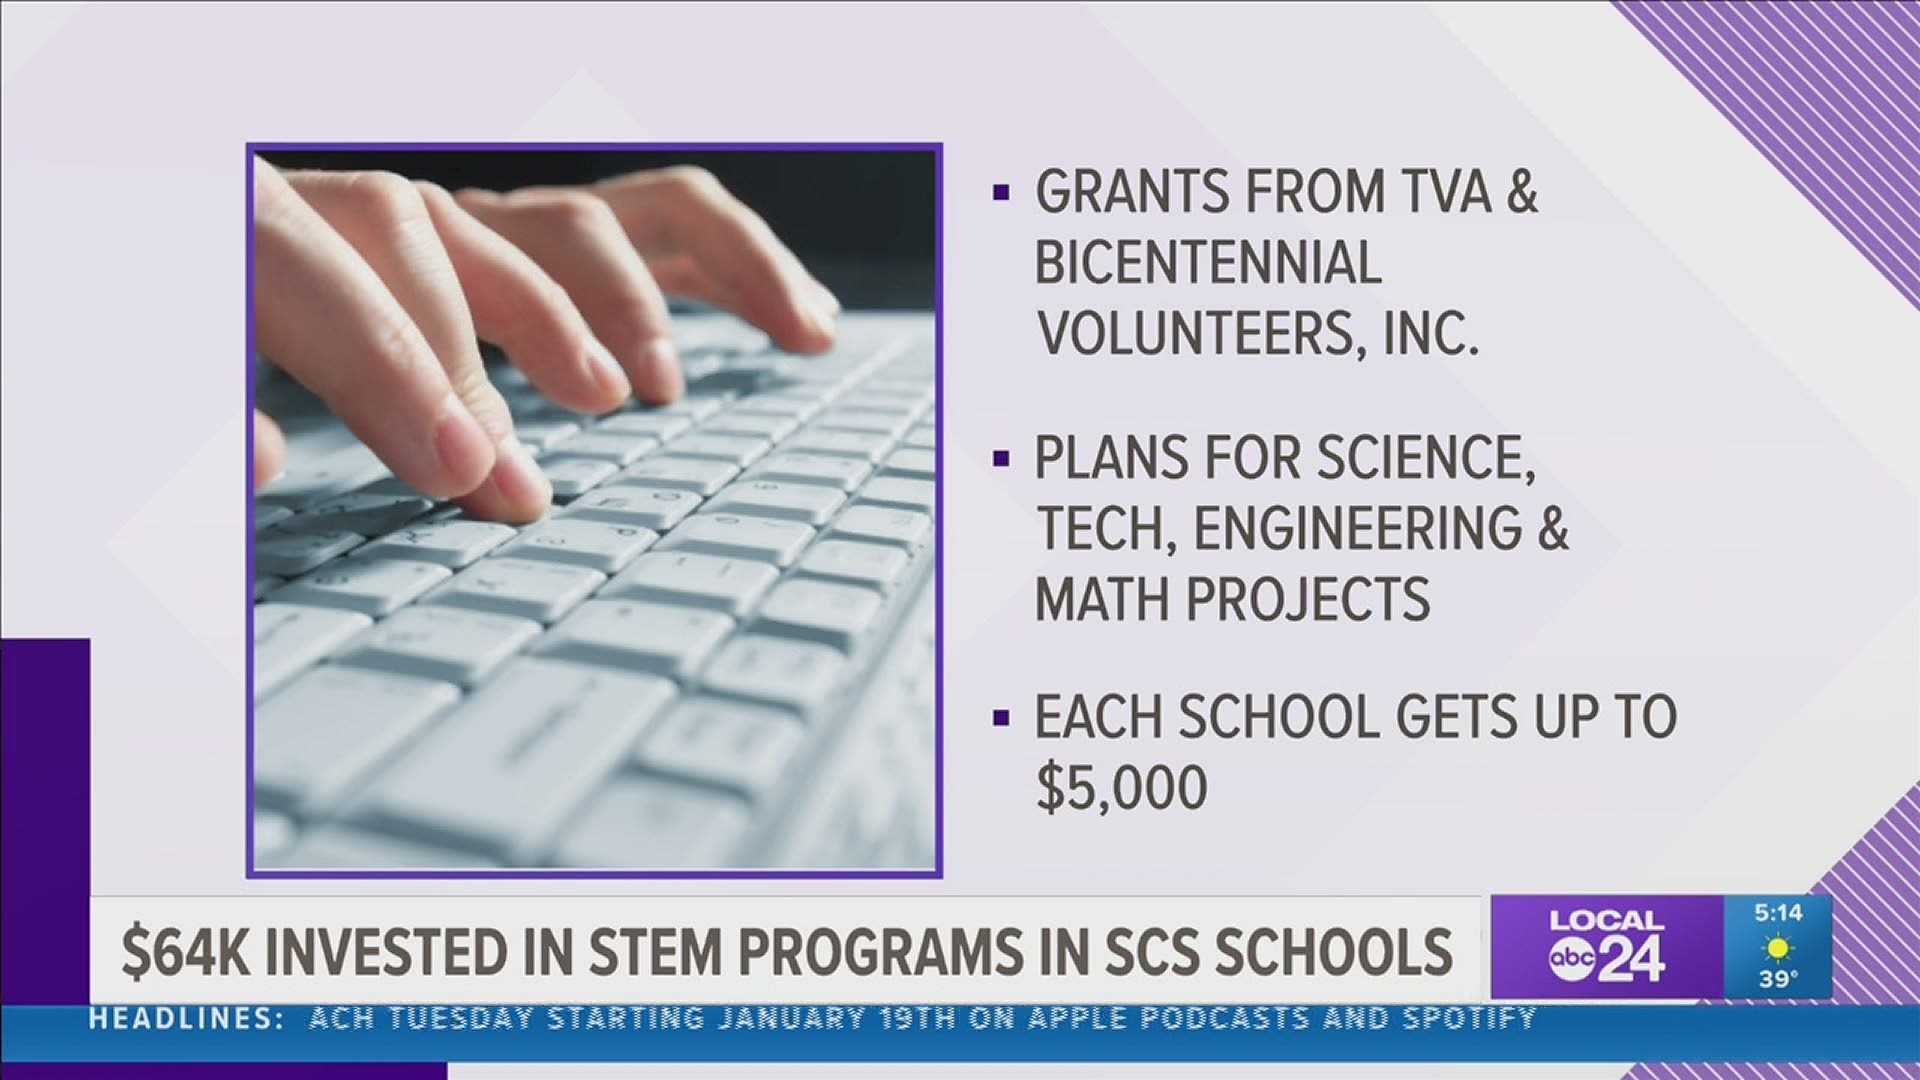 The grants for public schools are meant to develop science, technology, engineering, and math education projects all across the Tennessee Valley.